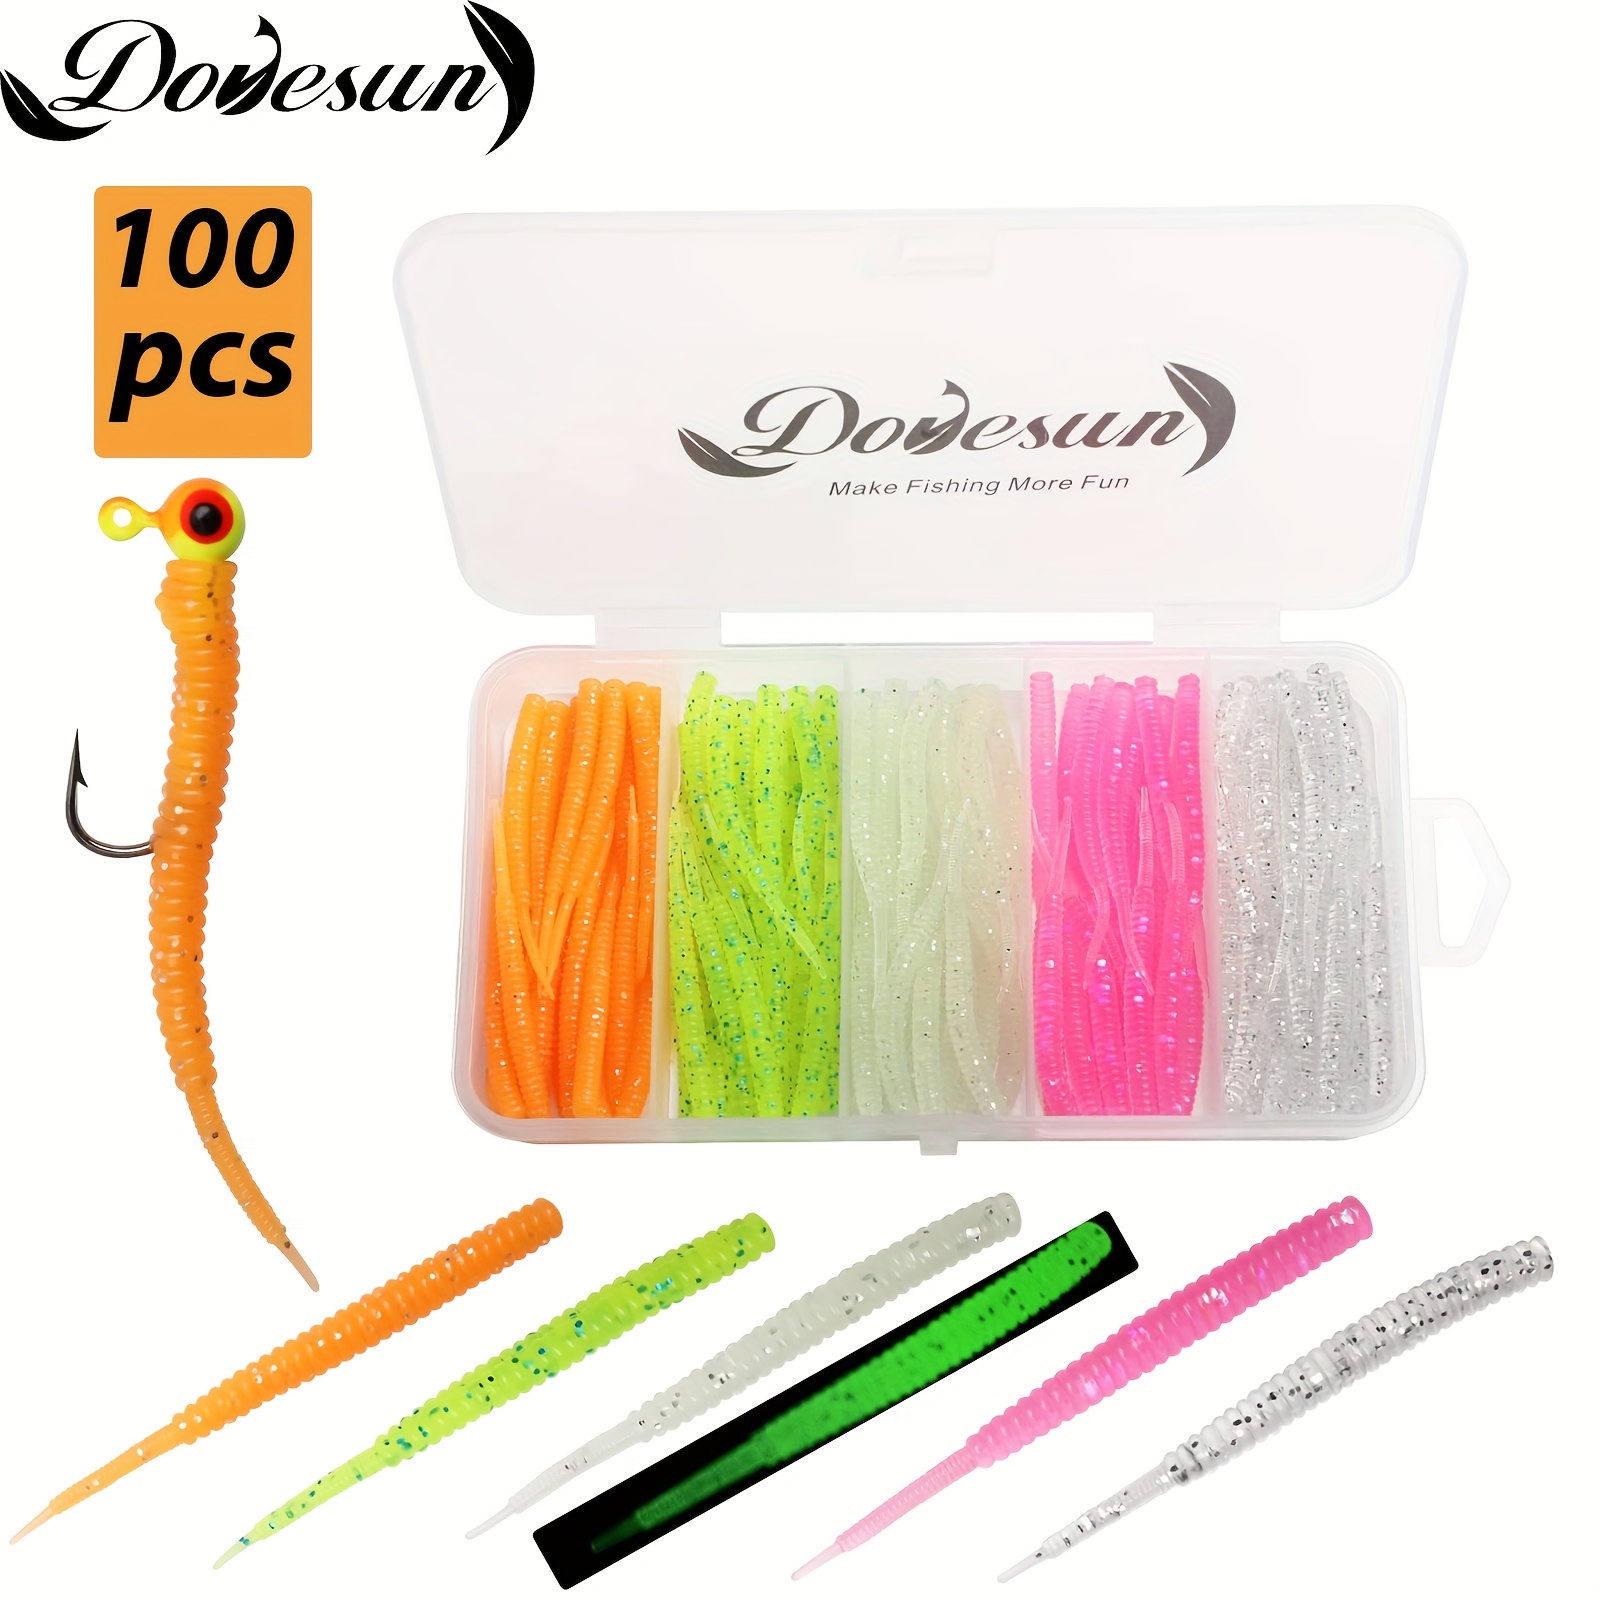 100pcs Soft Fishing Lures Kit, Soft Plastic Curly-Tail Swim-Bait Bass  Fishing Lure, Fishing Baits With Trackle Box